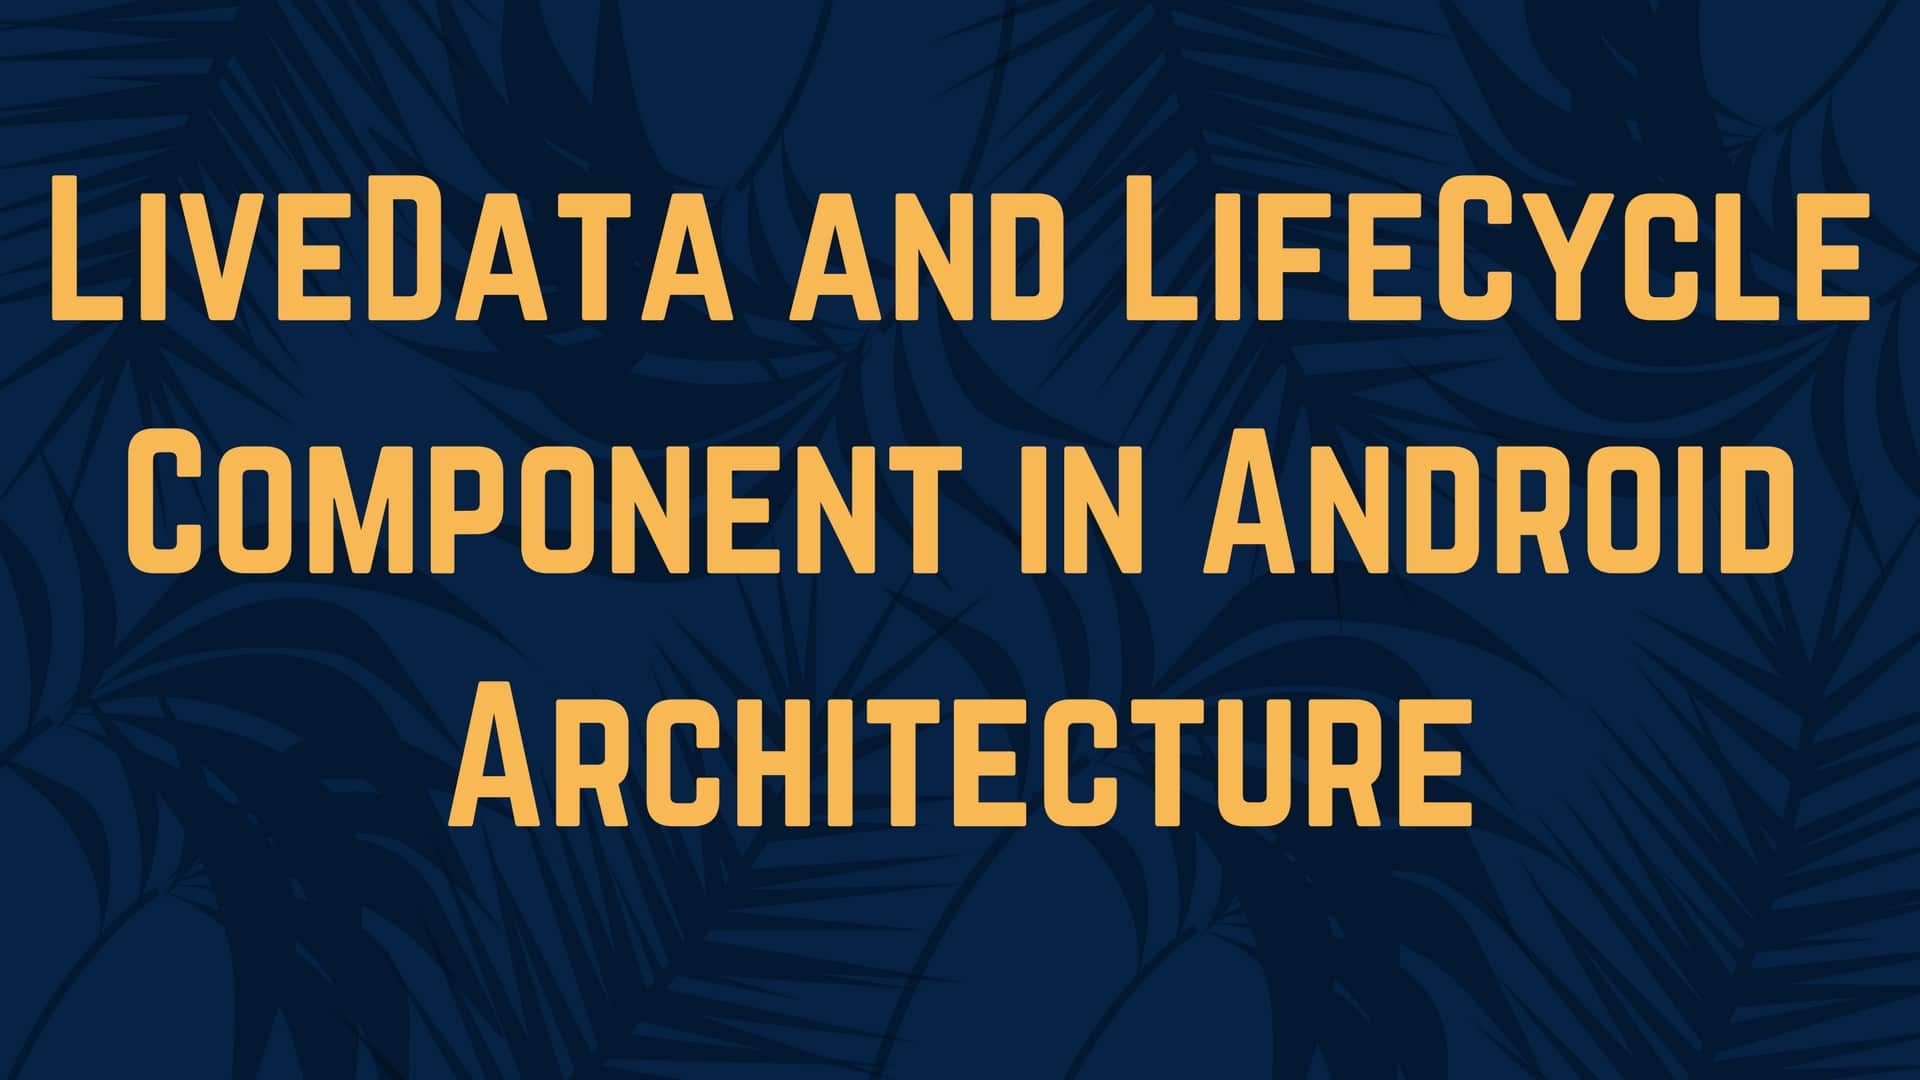 LiveData and LifeCycle Component in Android Architecture